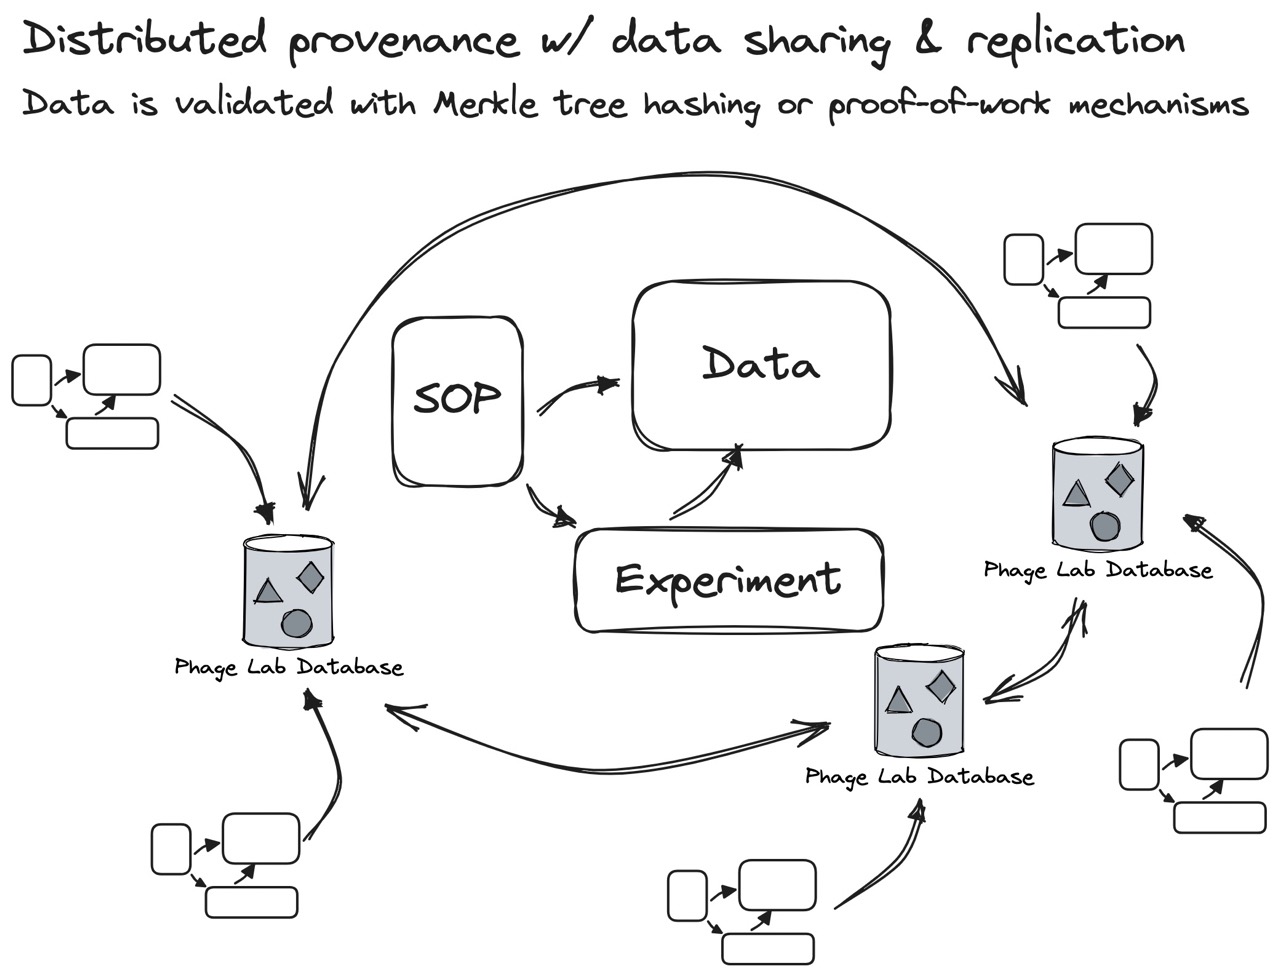 Fig 5. Data should be generated from experiment results that follow published SOPs. Instead of using a single database, the data system should allow labs to run their own replicated nodes within a network of “federated” databases (similar to Mastodon). This gives each lab the freedom to control what data is shared, and what data stays private within the lab. To comply with GMP and lab audits, the phage field could eventually borrow cryptographic ideas like “Merkle tree hashing” or “ZK rollups” to support both verifiable and anonymous data.